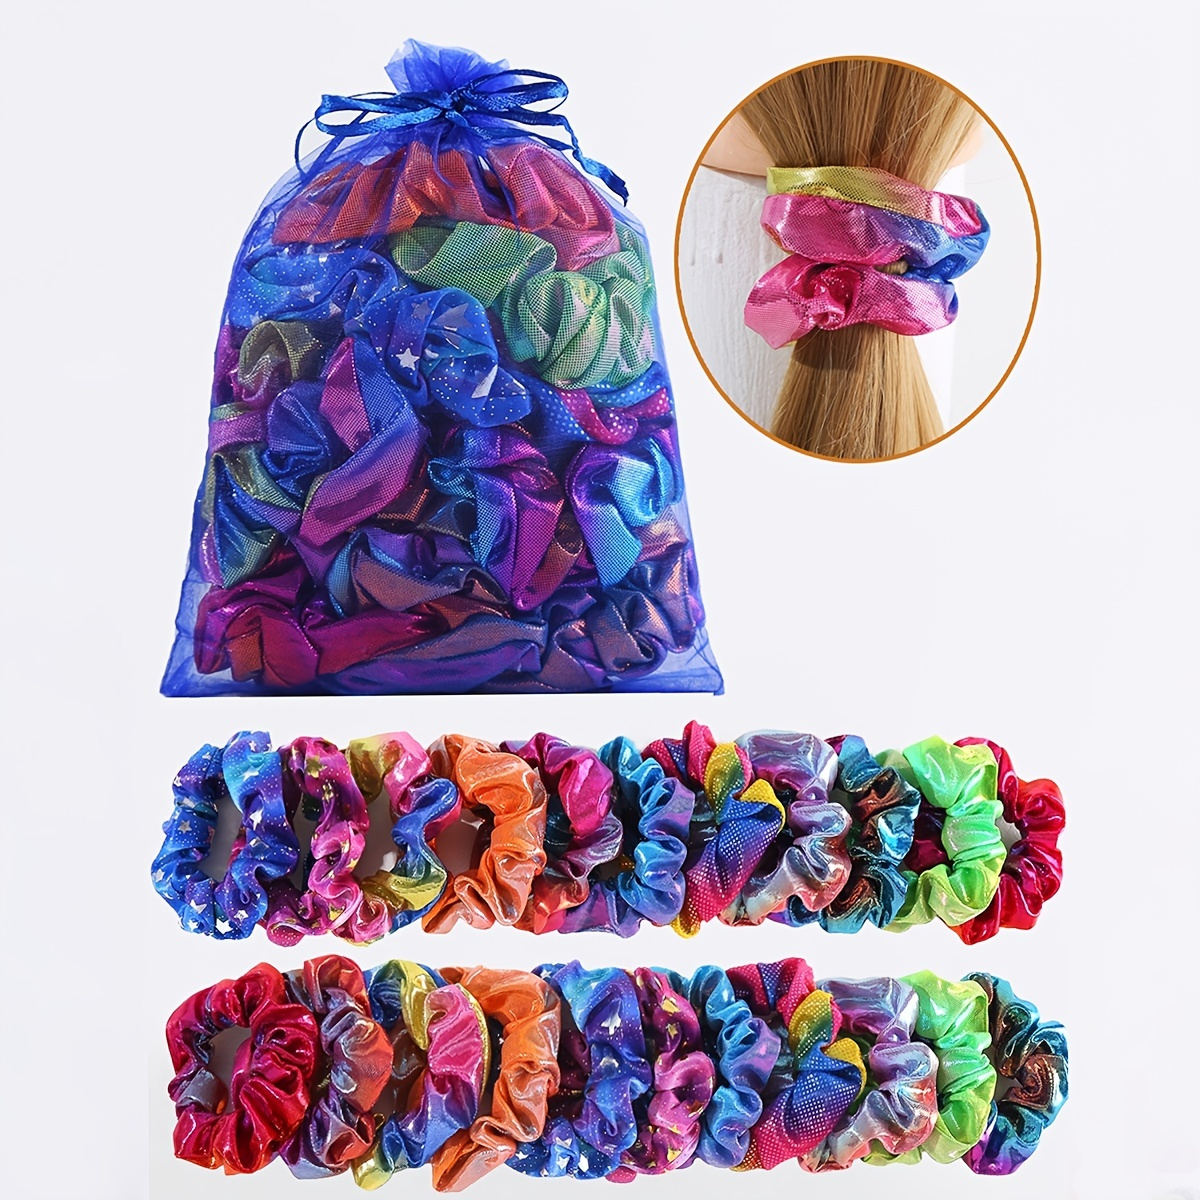 

20pcs Colorful Metallic Scrunchies - Shiny Mermaid Hair Ties For Women And Girls - Elasticated Neon Hair Ties For Ponytail Holder And Hair Accessories